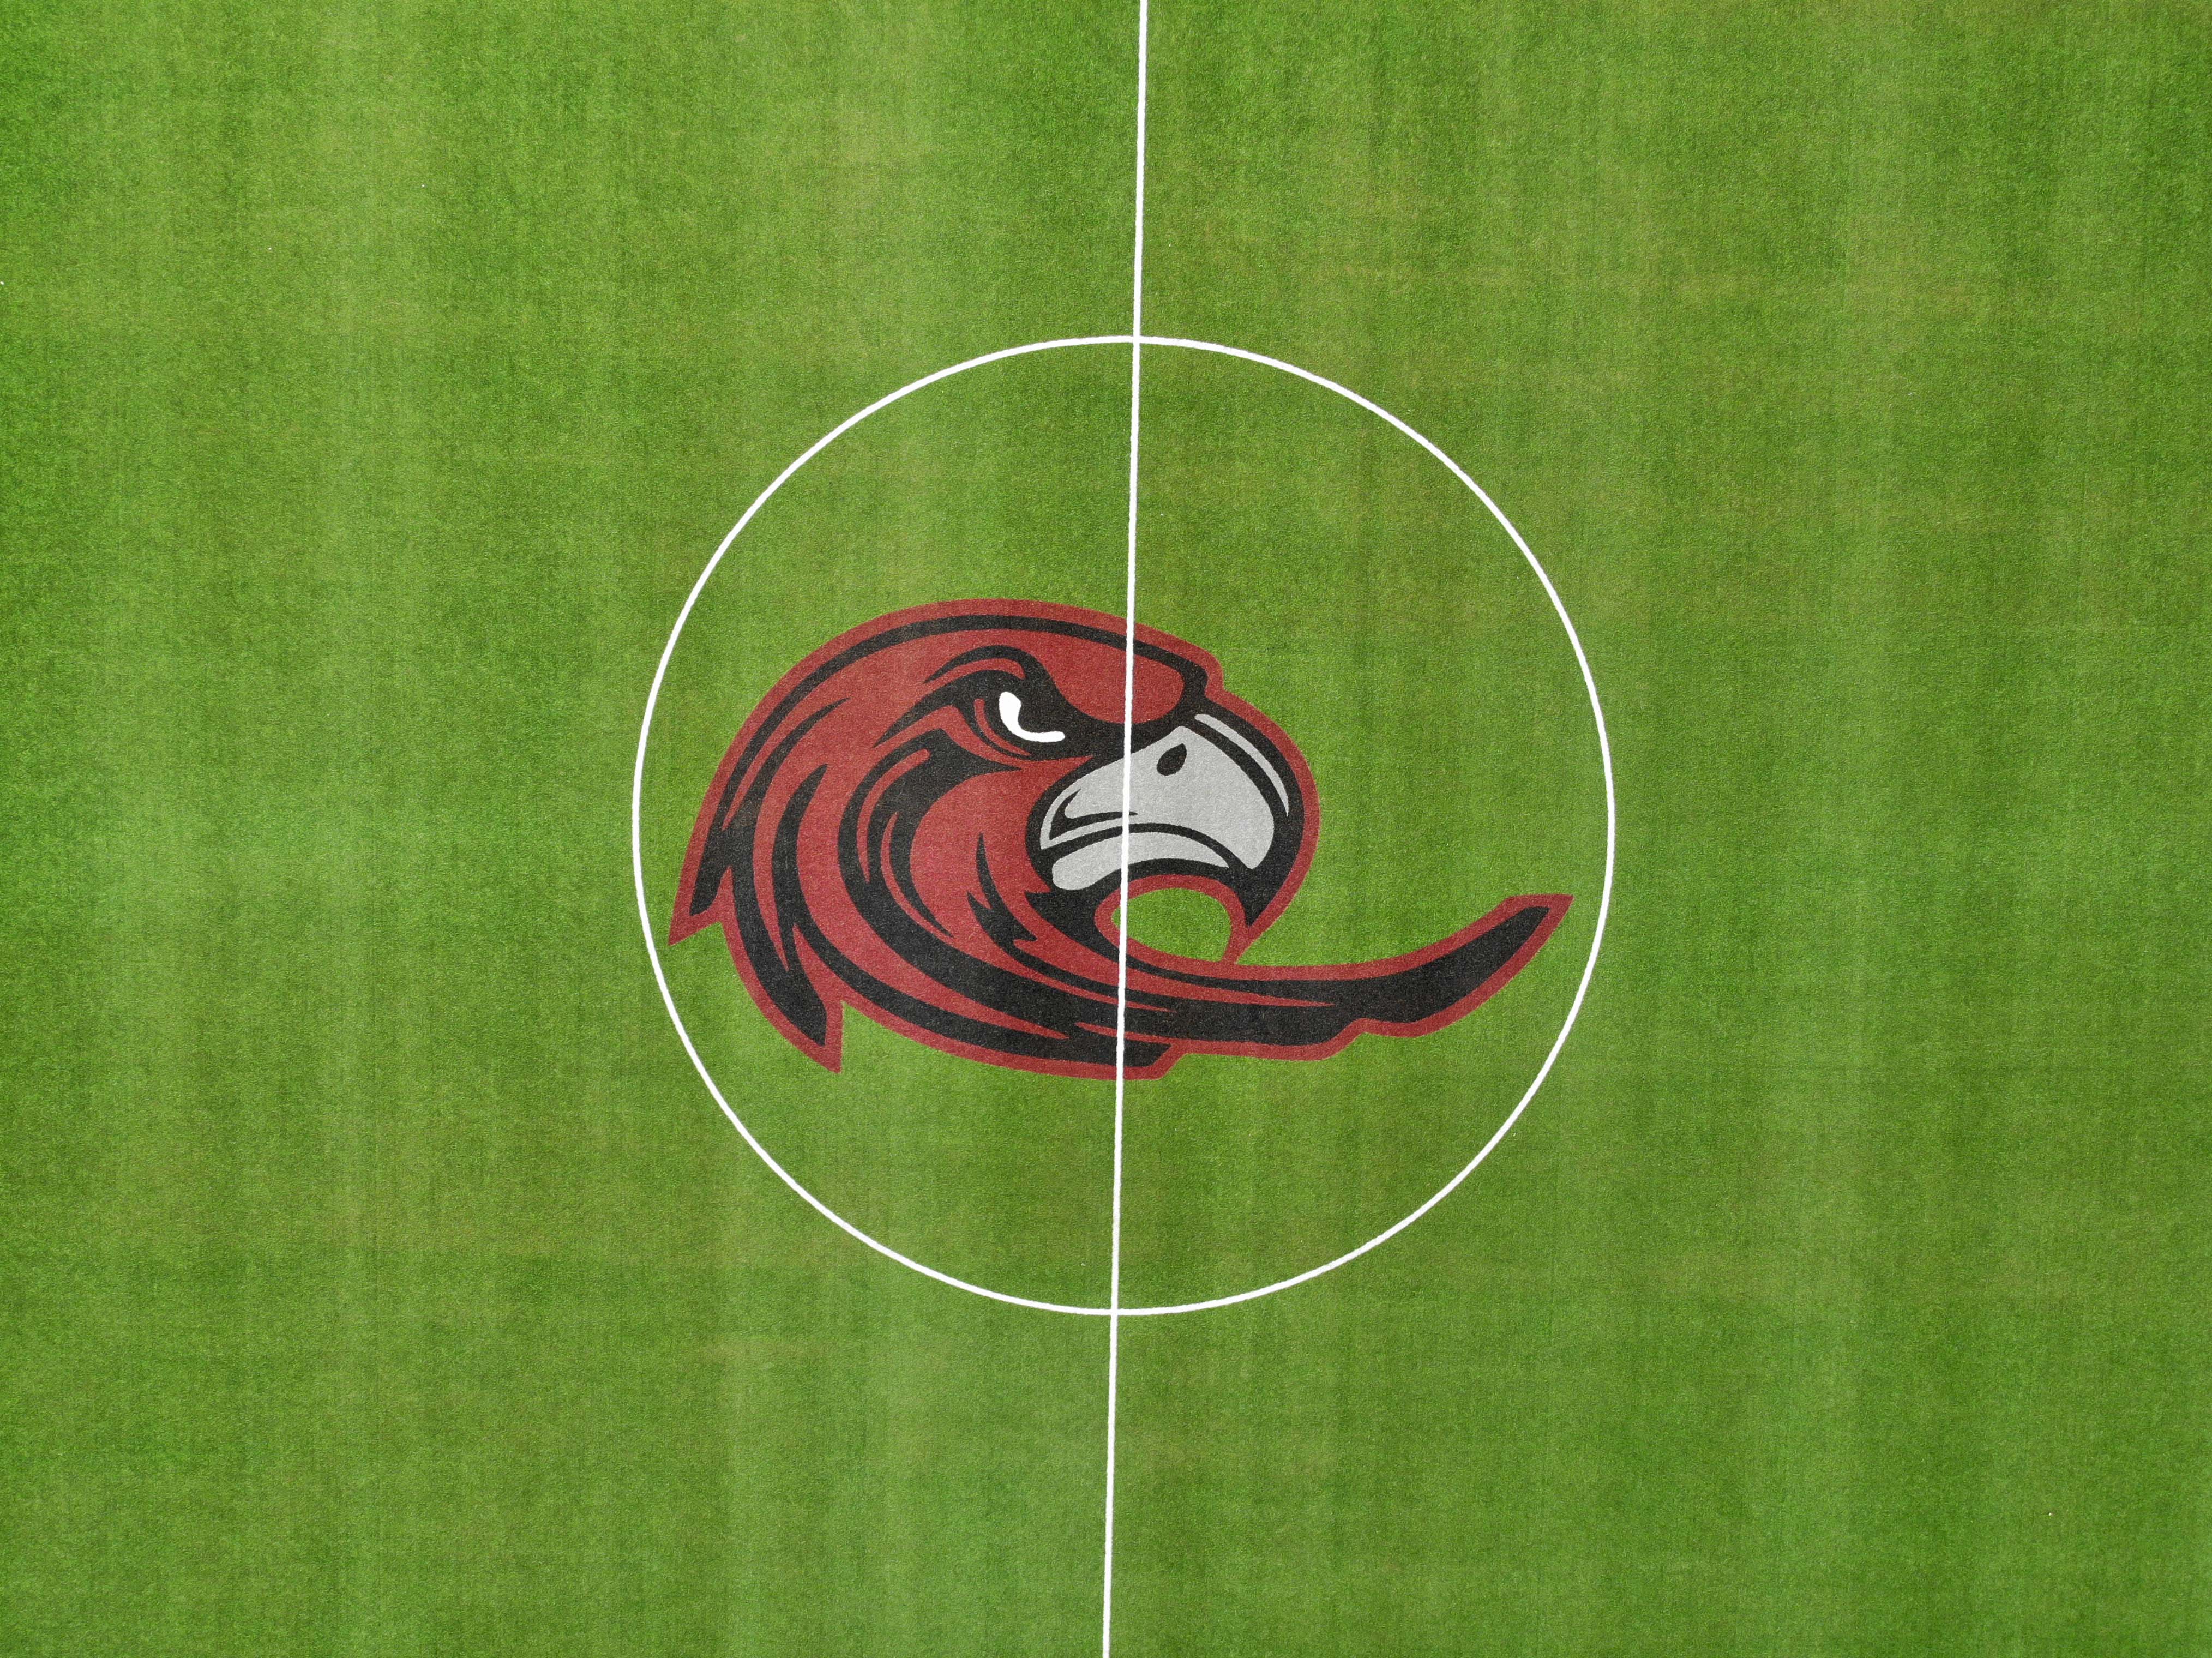 Hawk Logo at Midfield of the Soccer Pitch